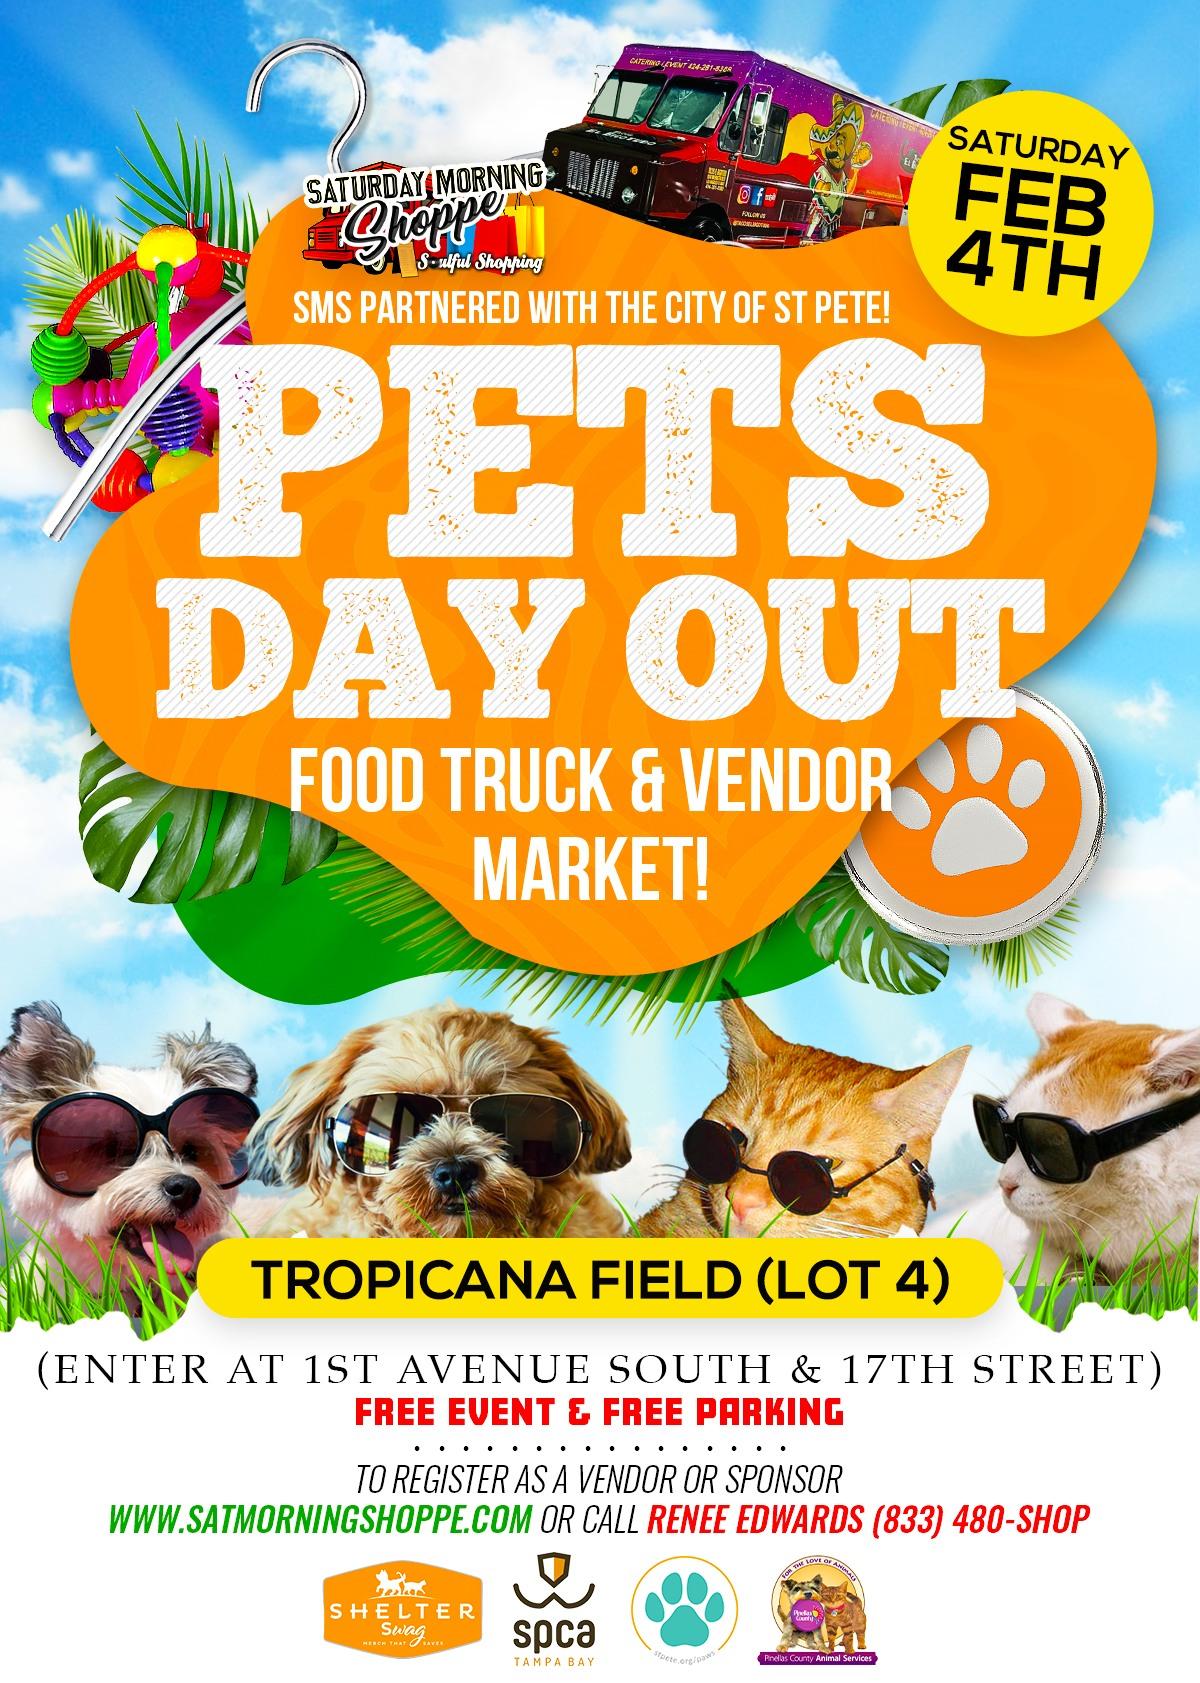 Pets Day Out! - Food Truck & Vendor Market